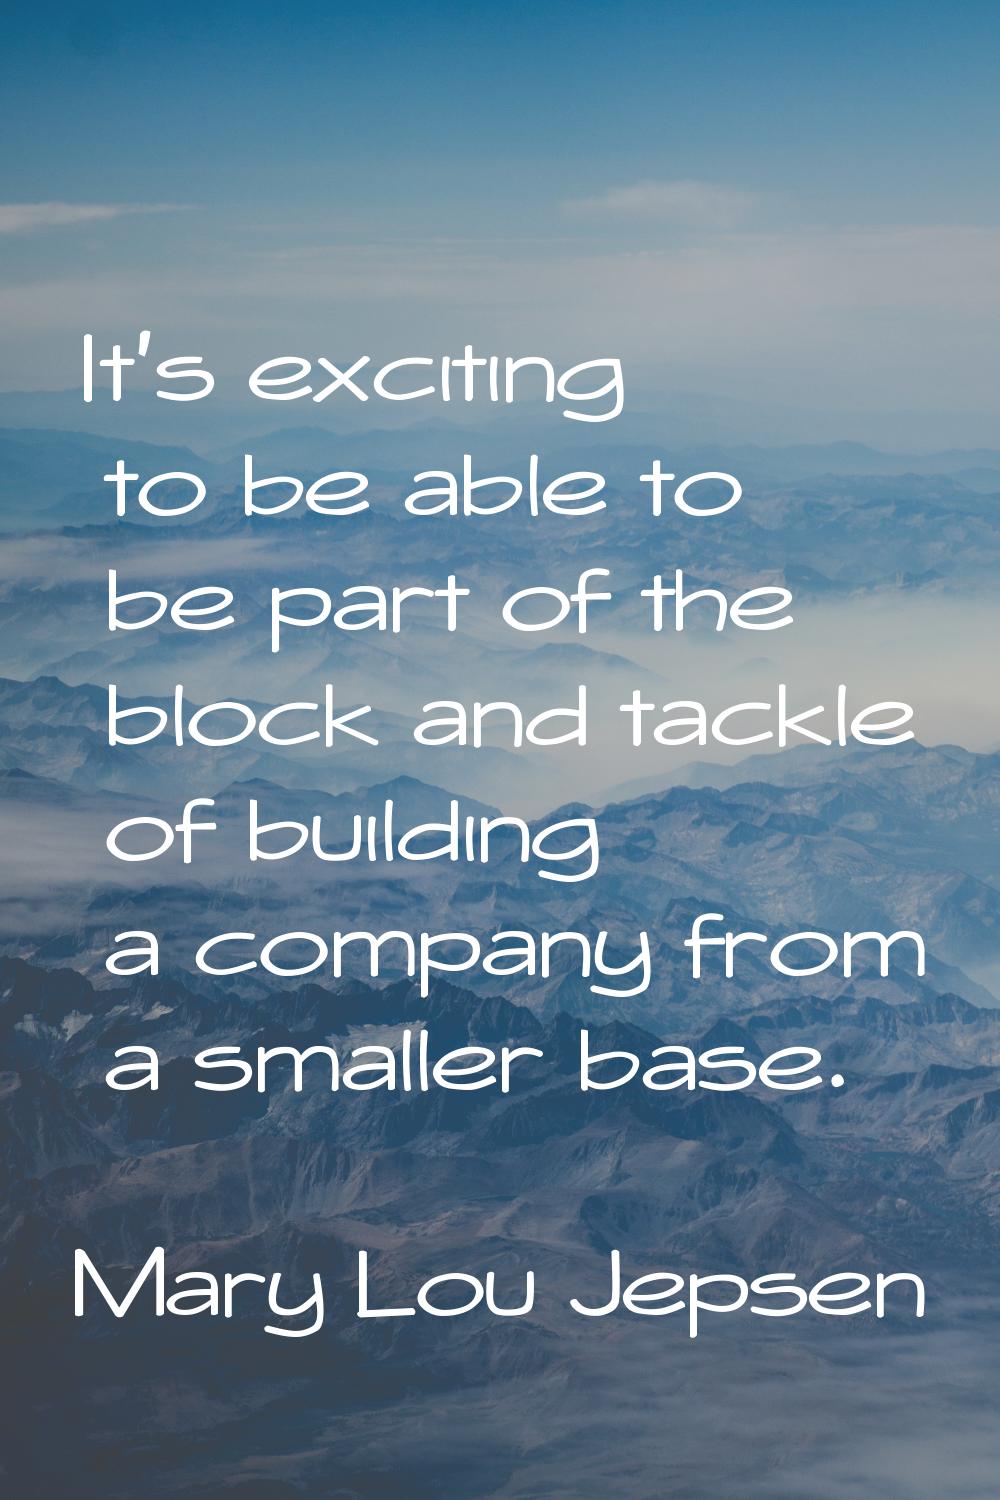 It's exciting to be able to be part of the block and tackle of building a company from a smaller ba